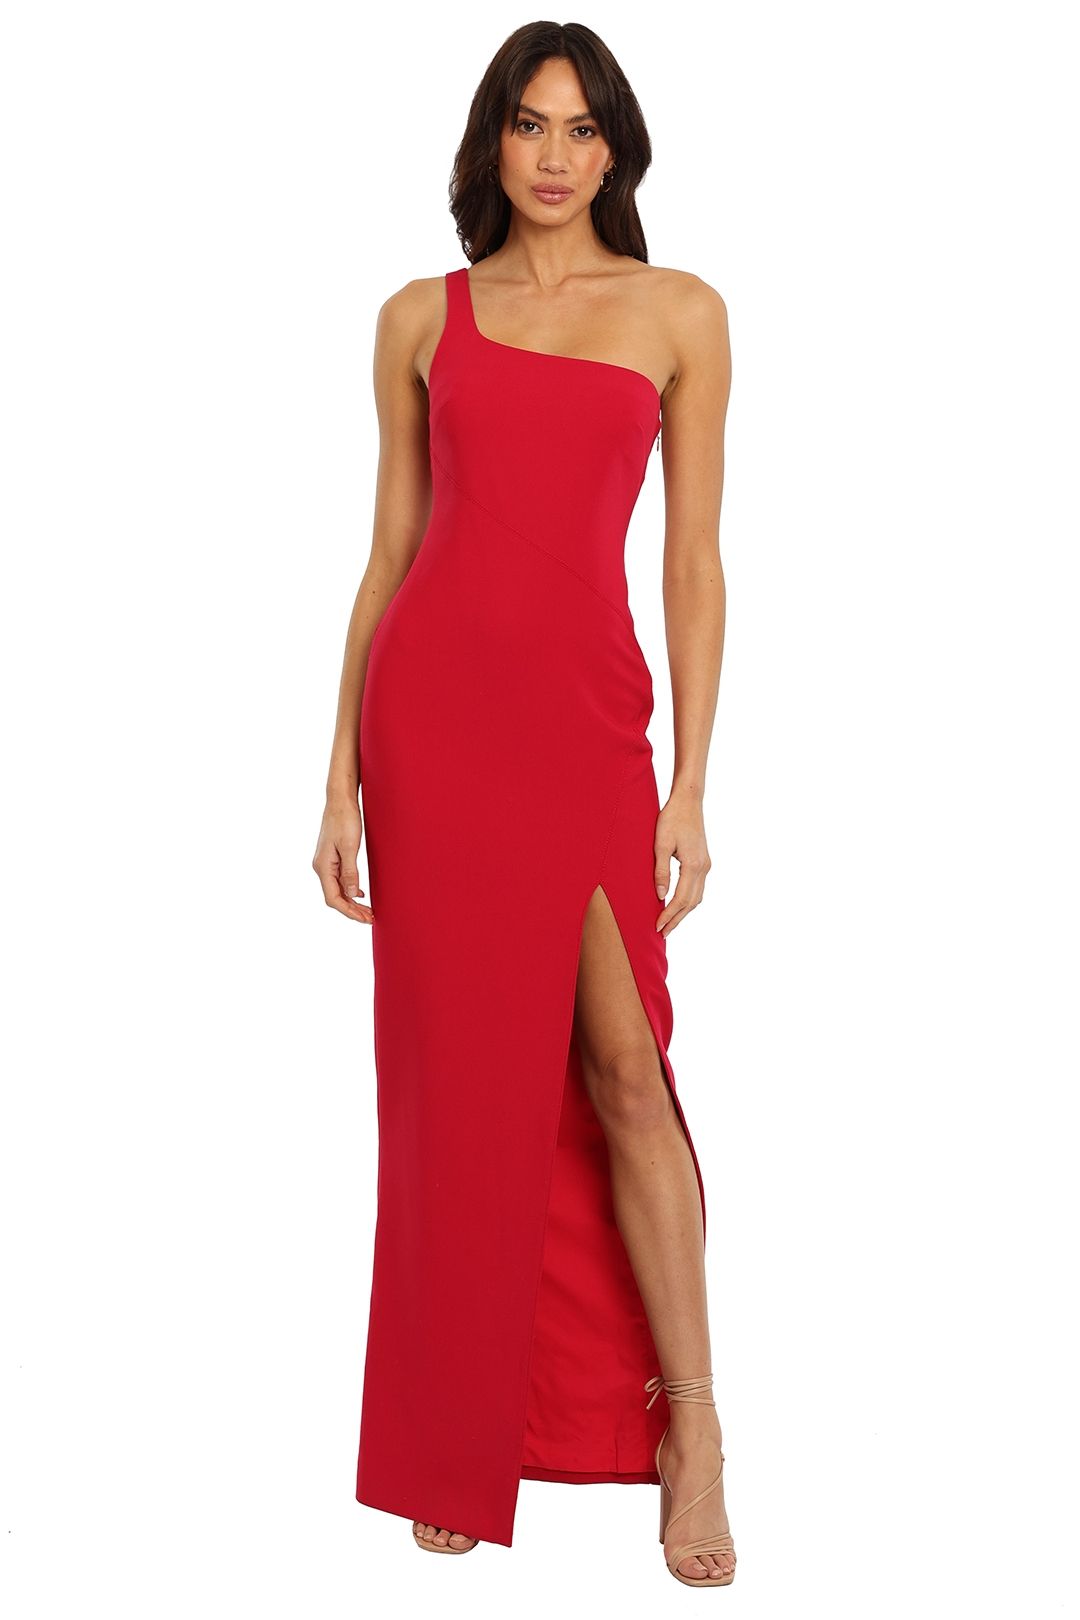 Likely NYC Camden Gown Scarlett red